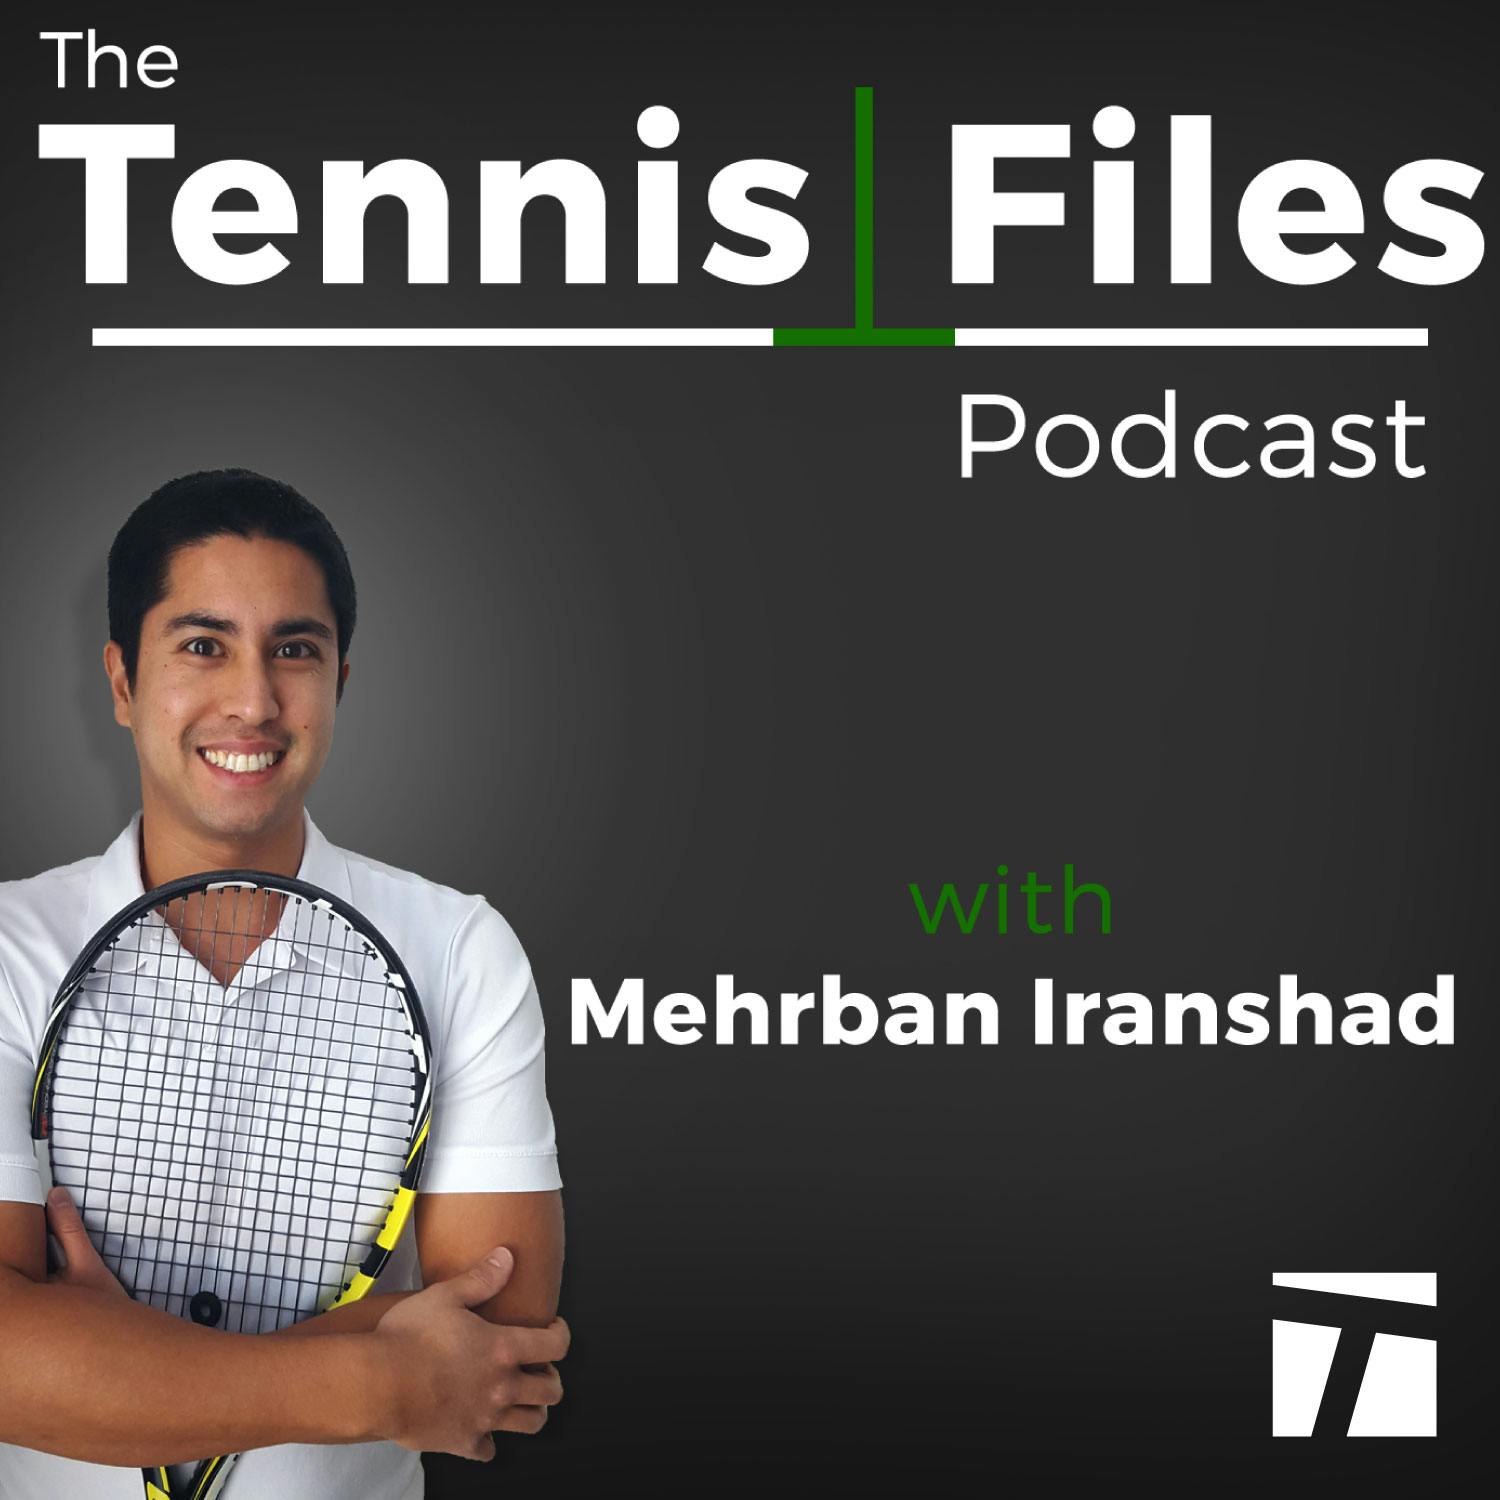 TFP 218: How to Warm Up and Strength Train for Tennis with Dean Hollingworth